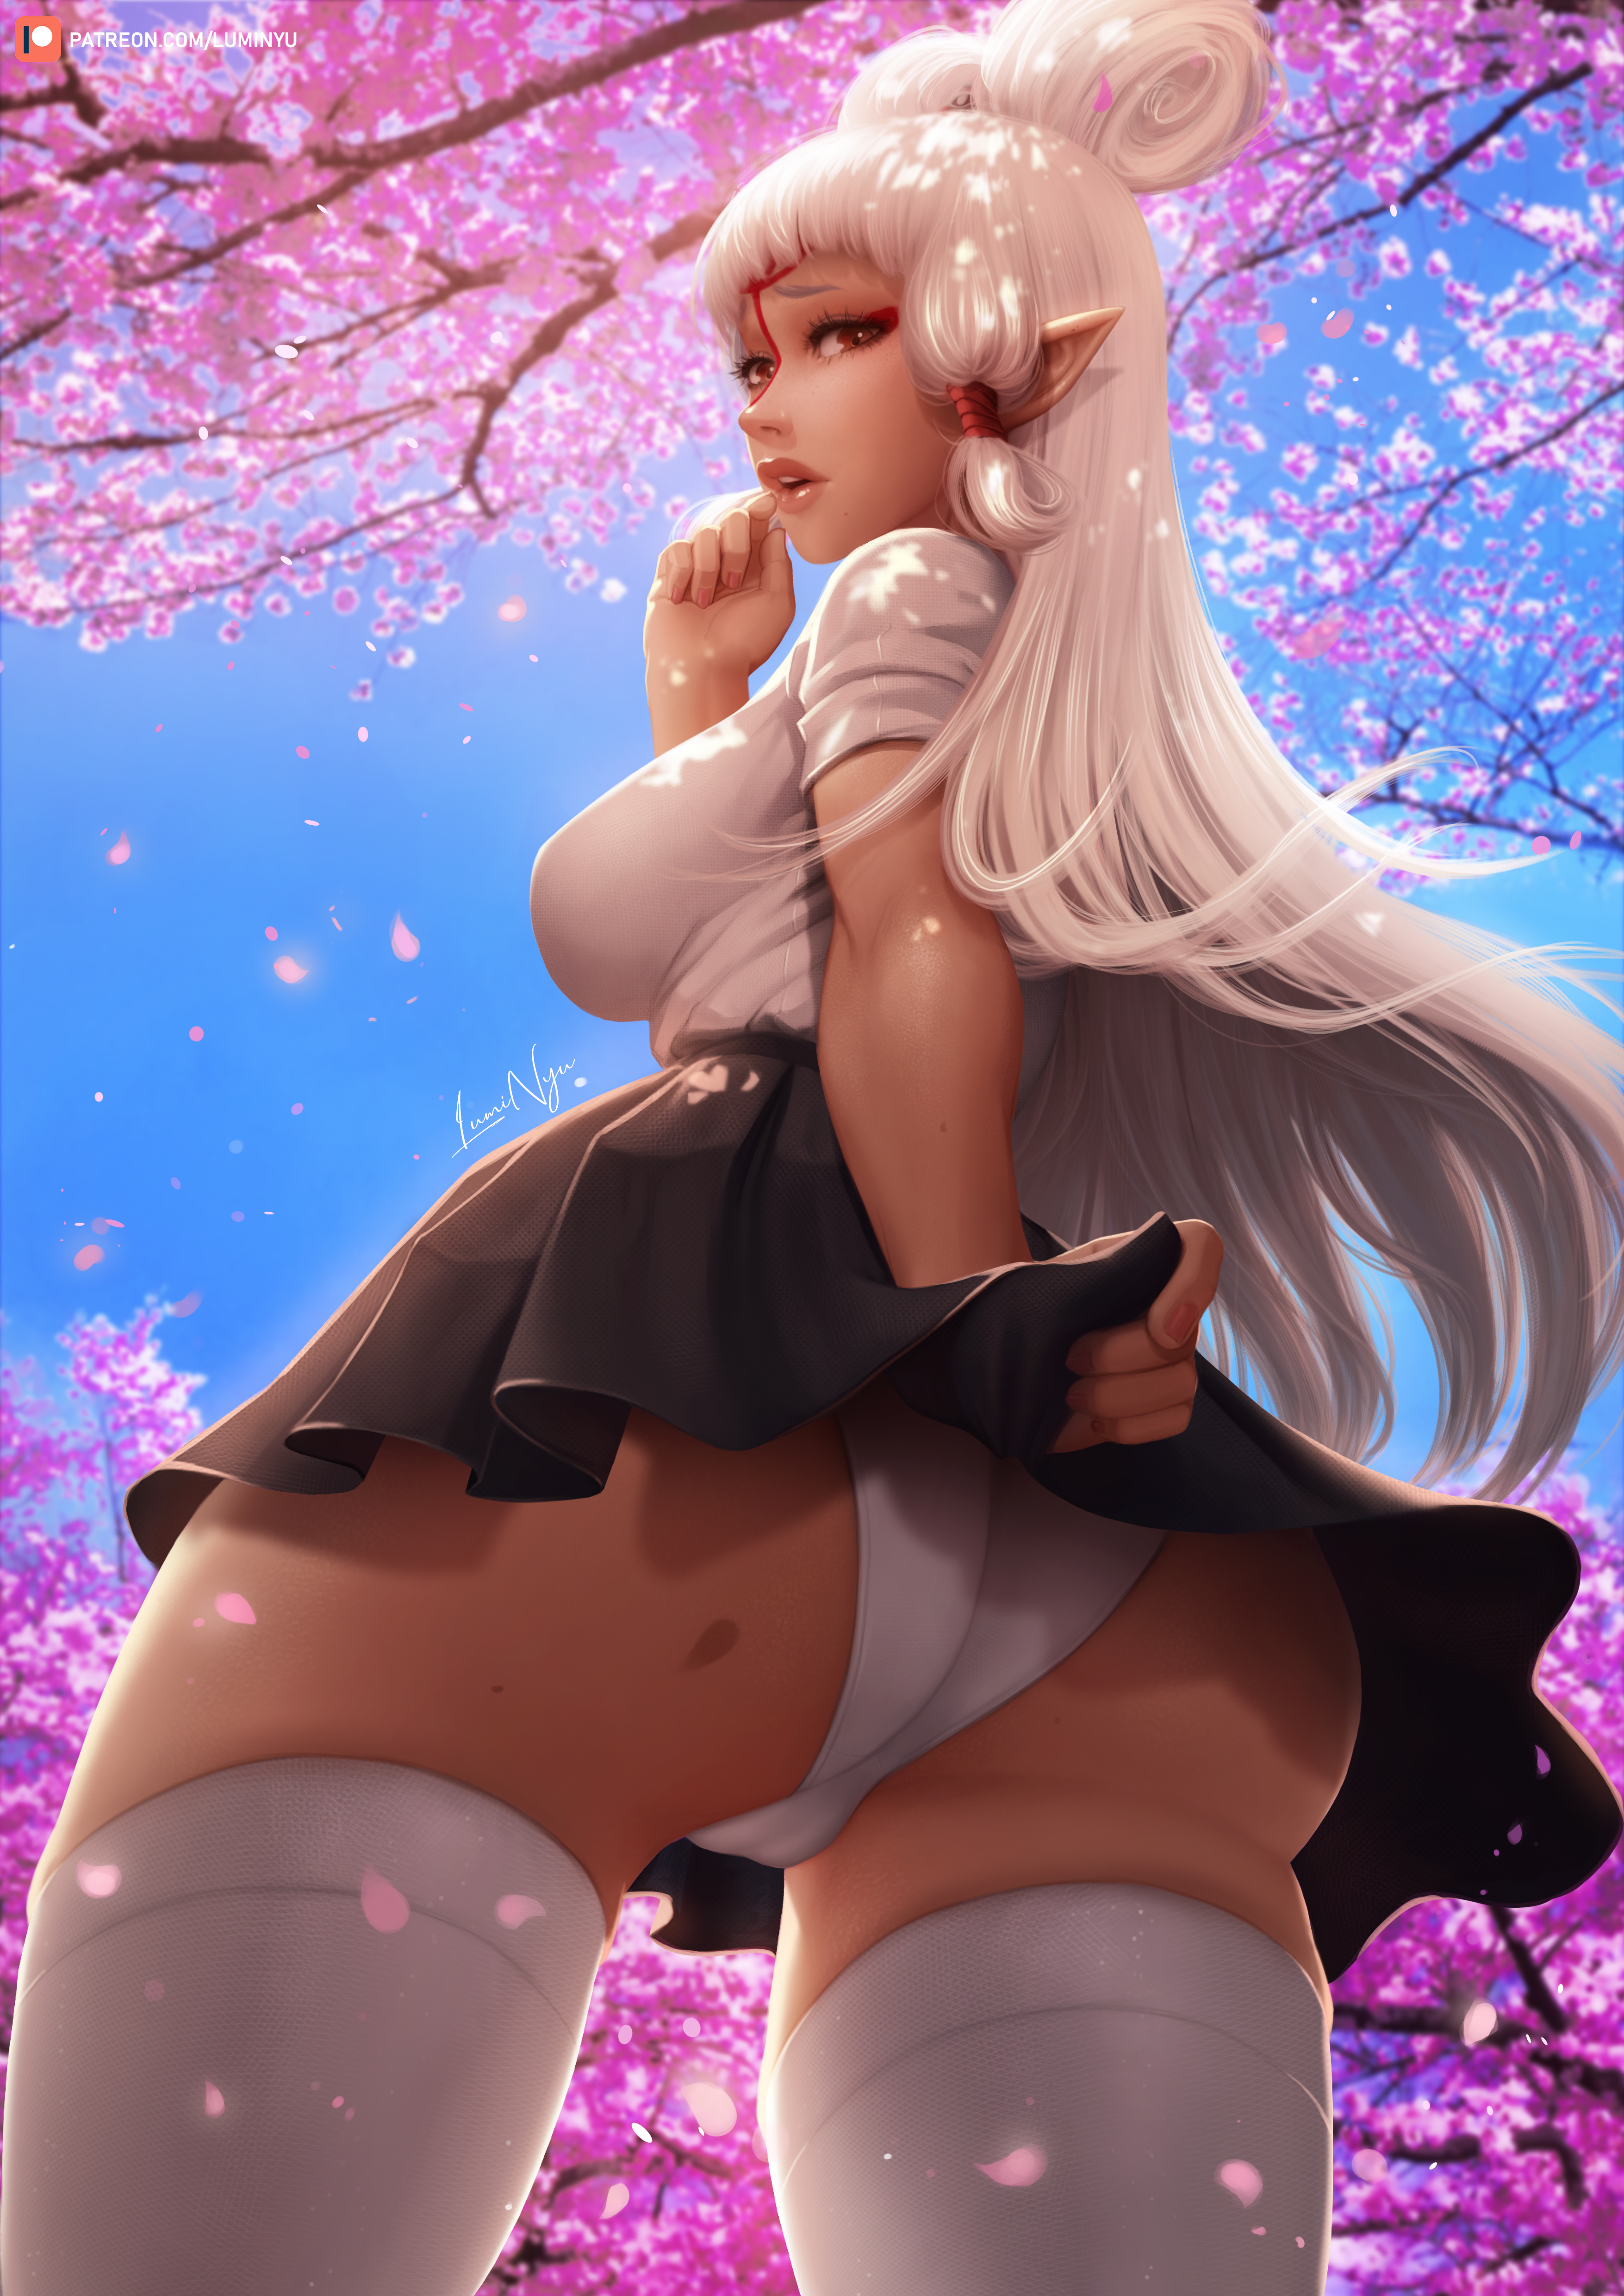 General 3509x4961 Paya The Legend of Zelda video games video game girls Nintendo fantasy girl school uniform shirt miniskirt upskirt underwear panties white panties ass cherry blossom pointy ears parted lips stockings white stockings thick thigh thighs 2D artwork drawing illustration fan art LumiNyu low-angle petals cherry trees sky clear sky